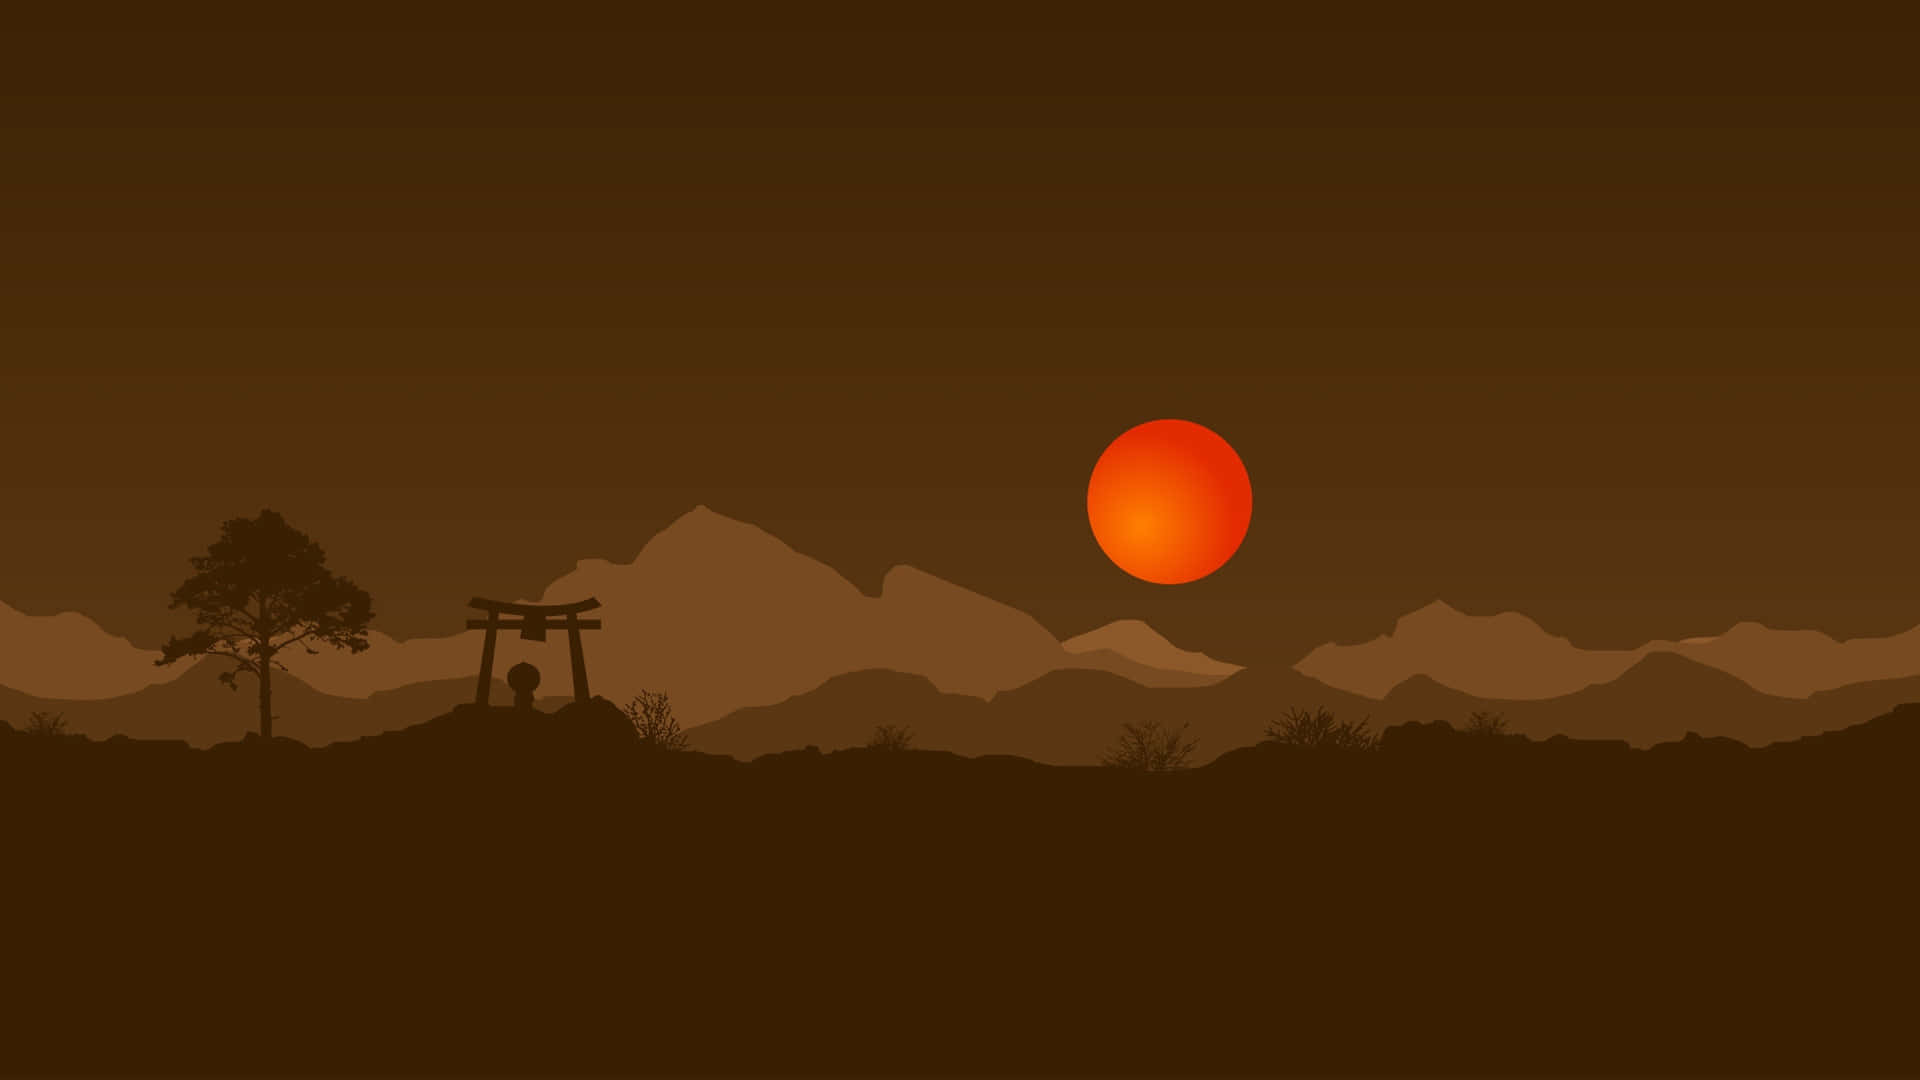 A Silhouette Of A Mountain With A Sun In The Background